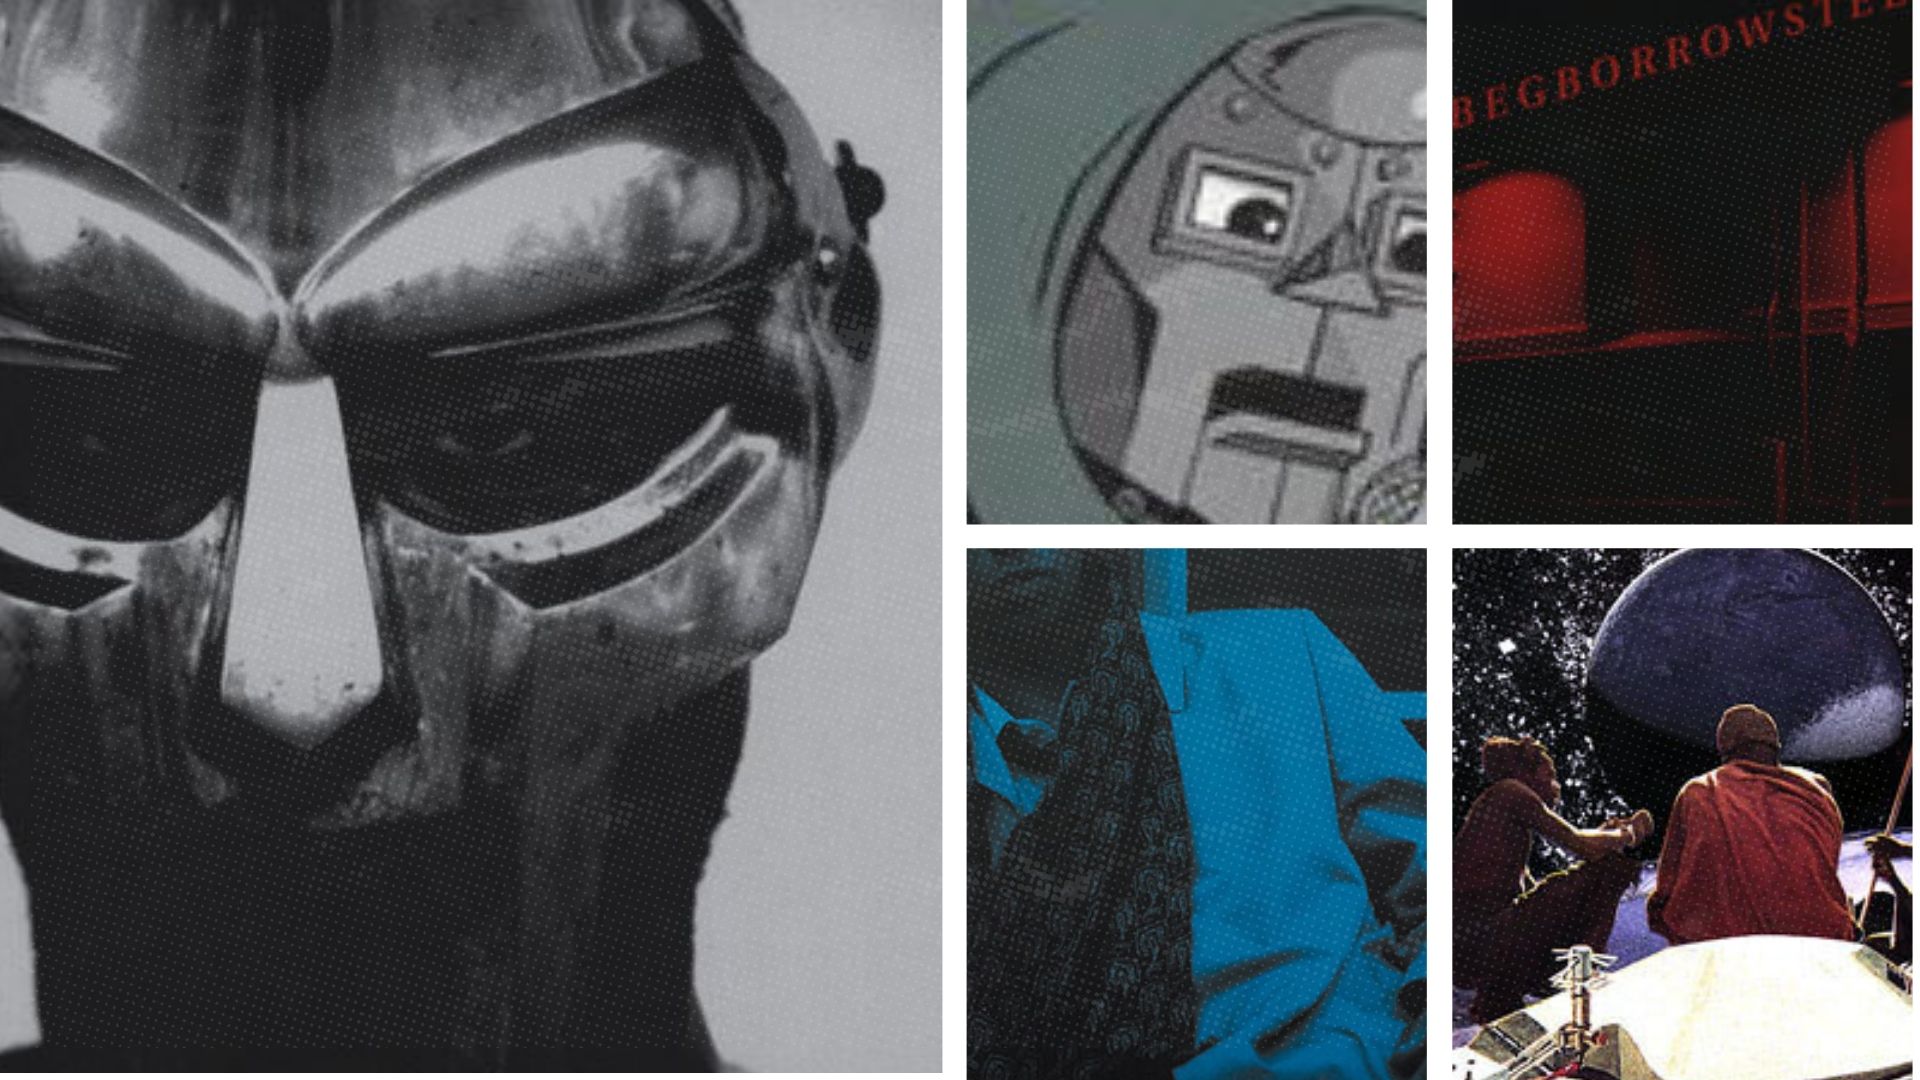 If You Like Madvillainy, Listen to These 4 Albums